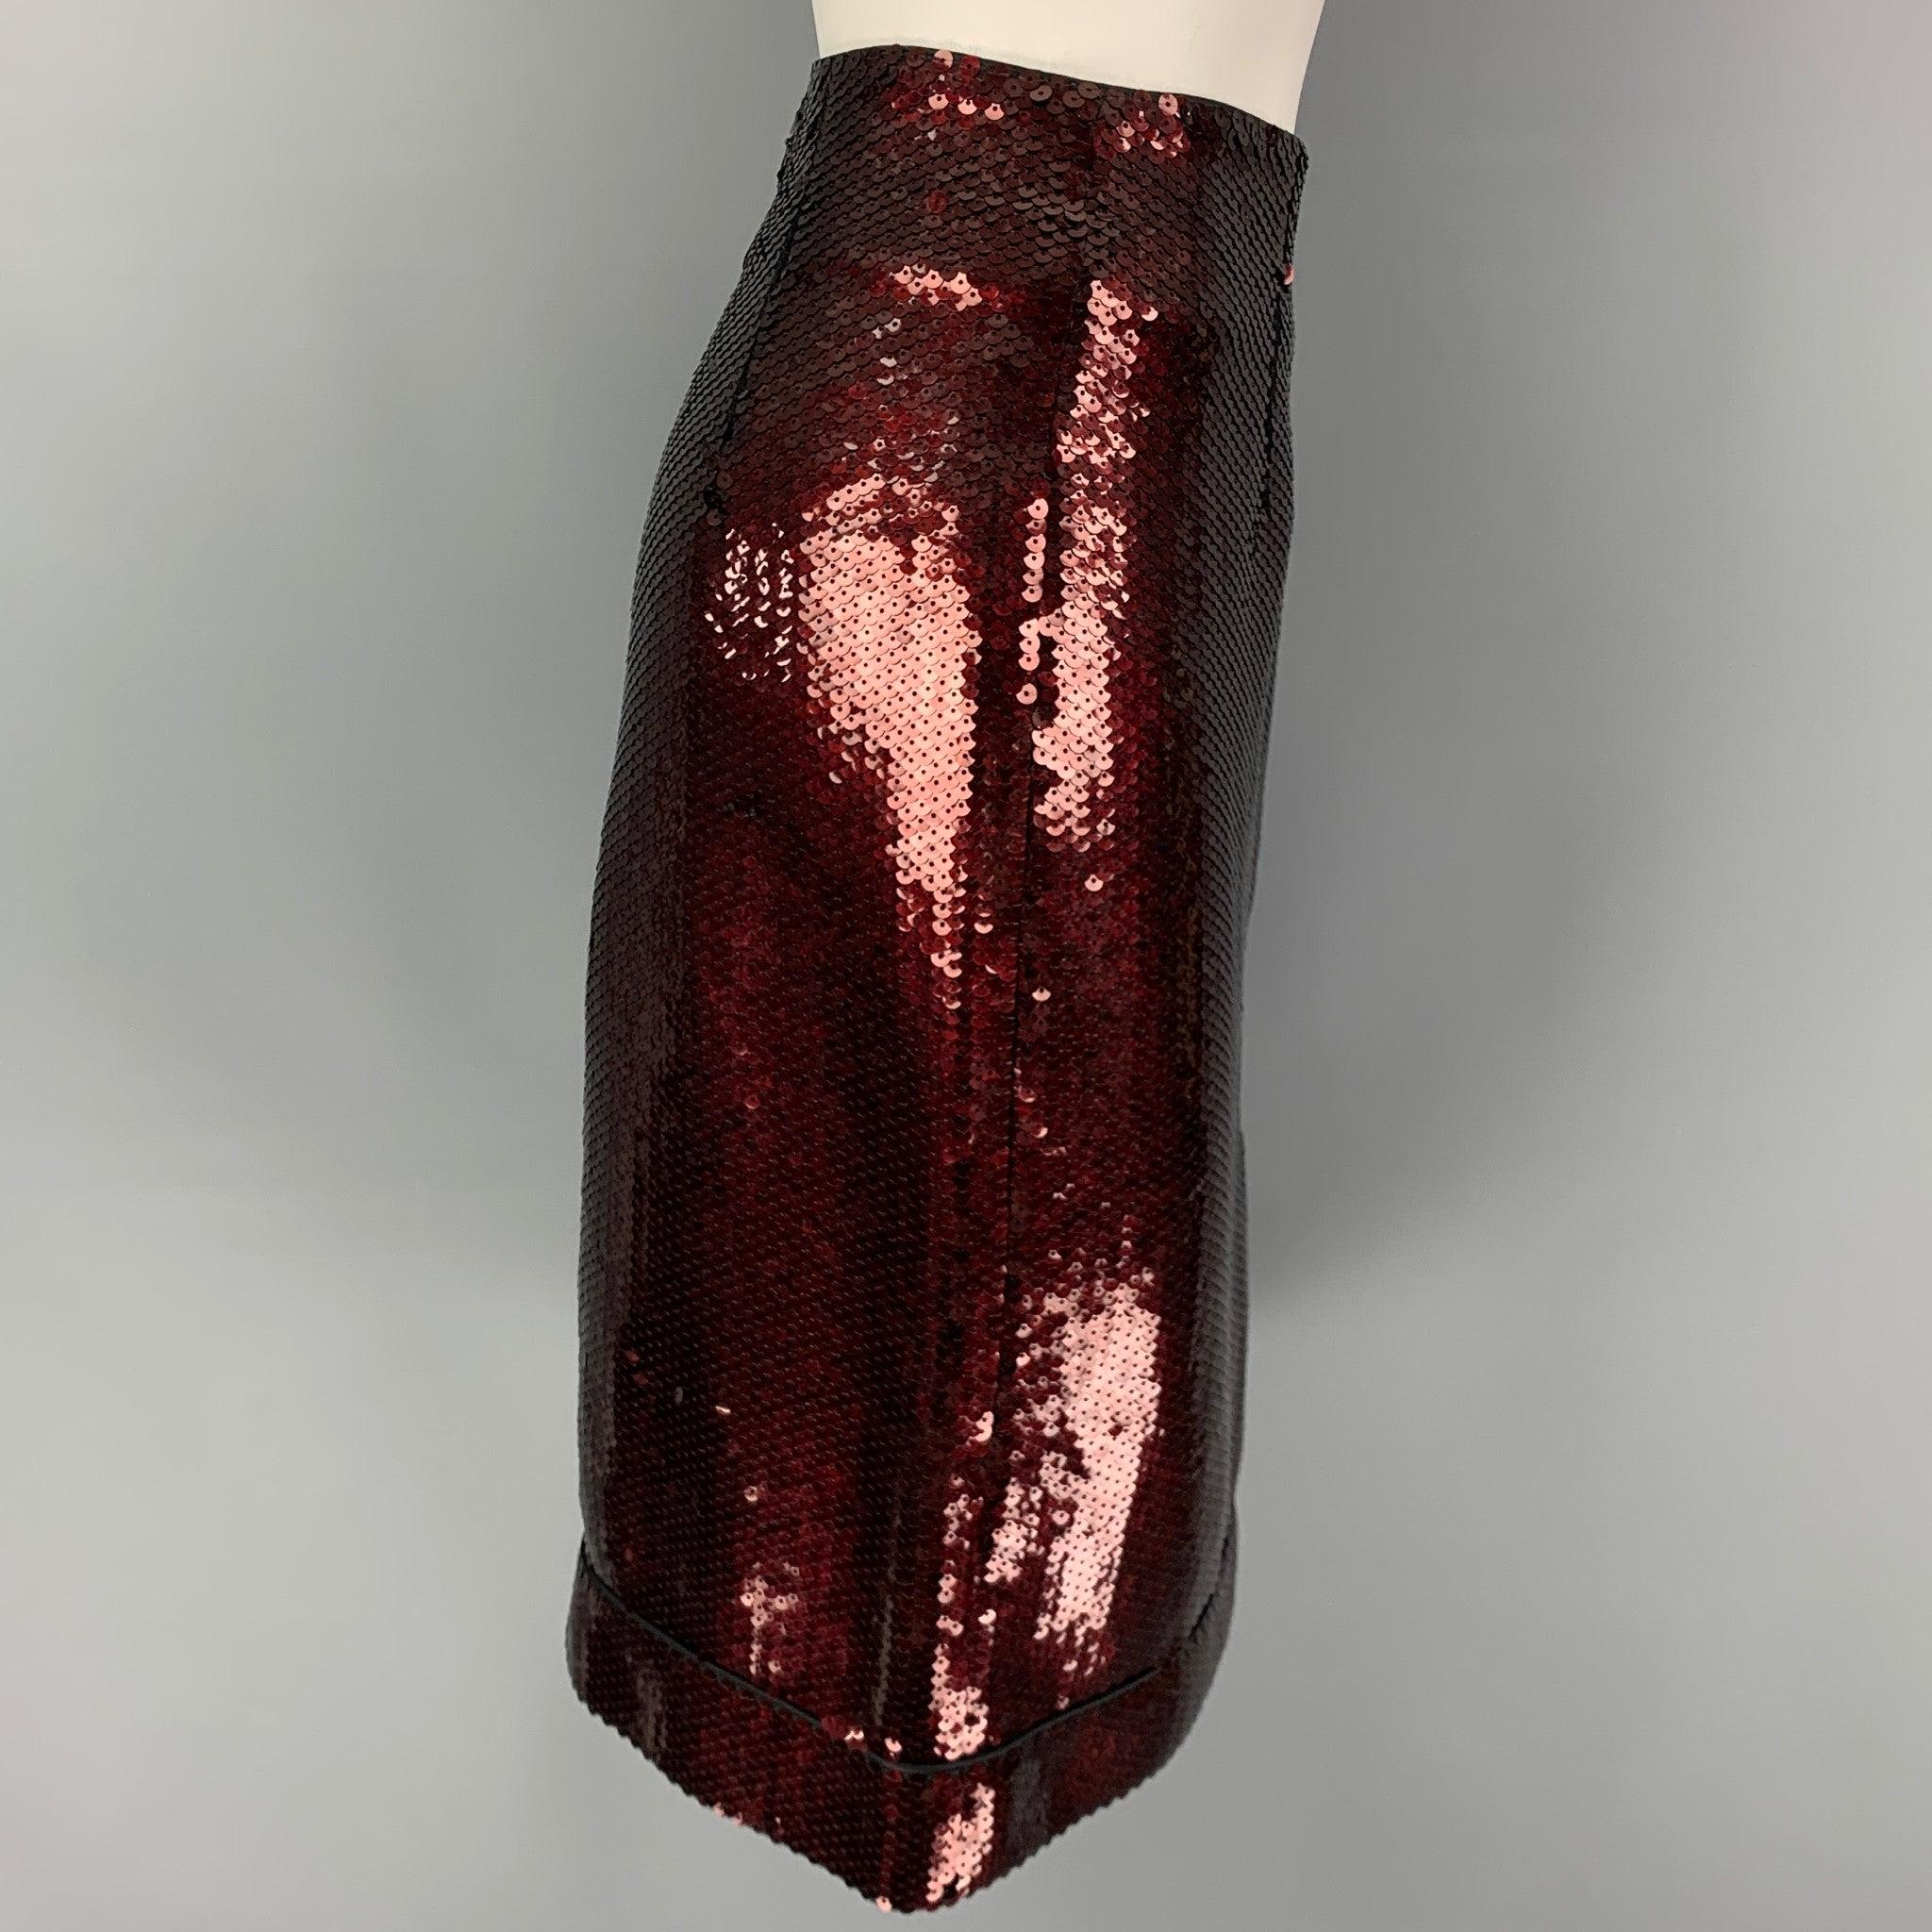 MARC JACOBS skirt comes in a burgundy & black sequined polyester blend featuring an a-line style and a back zip up closure.
Excellent
Pre-Owned Condition. 

Marked:   6 

Measurements: 
  Waist:
29 inches Hip: 38 inches Length: 24 inches 
  
  
